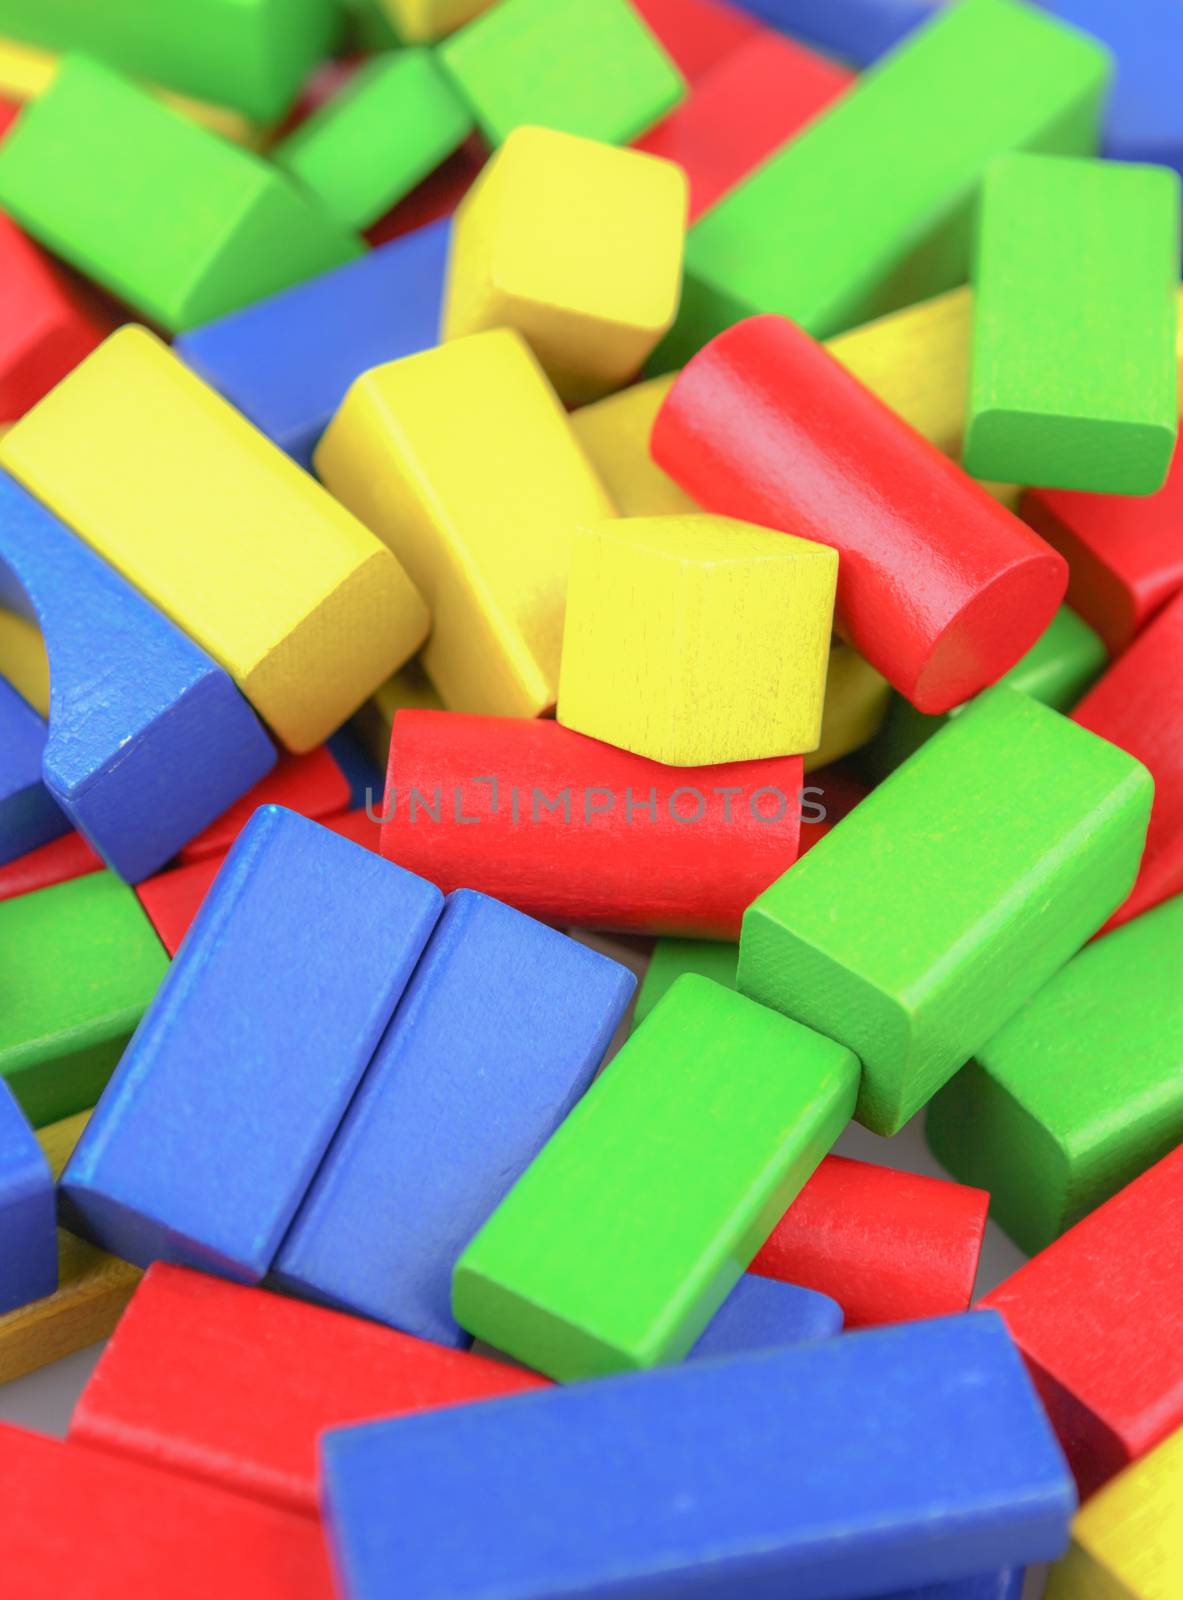 Colorful Wooden Building Blocks Toys  by nenovbrothers